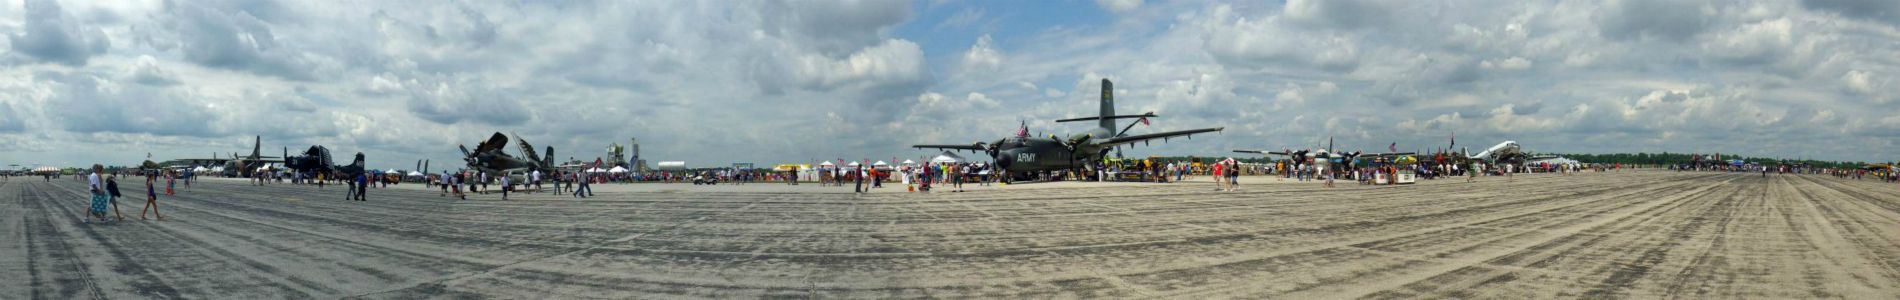 Thunder Over Michigan 2013 flightline panorama. To see the full size image click here